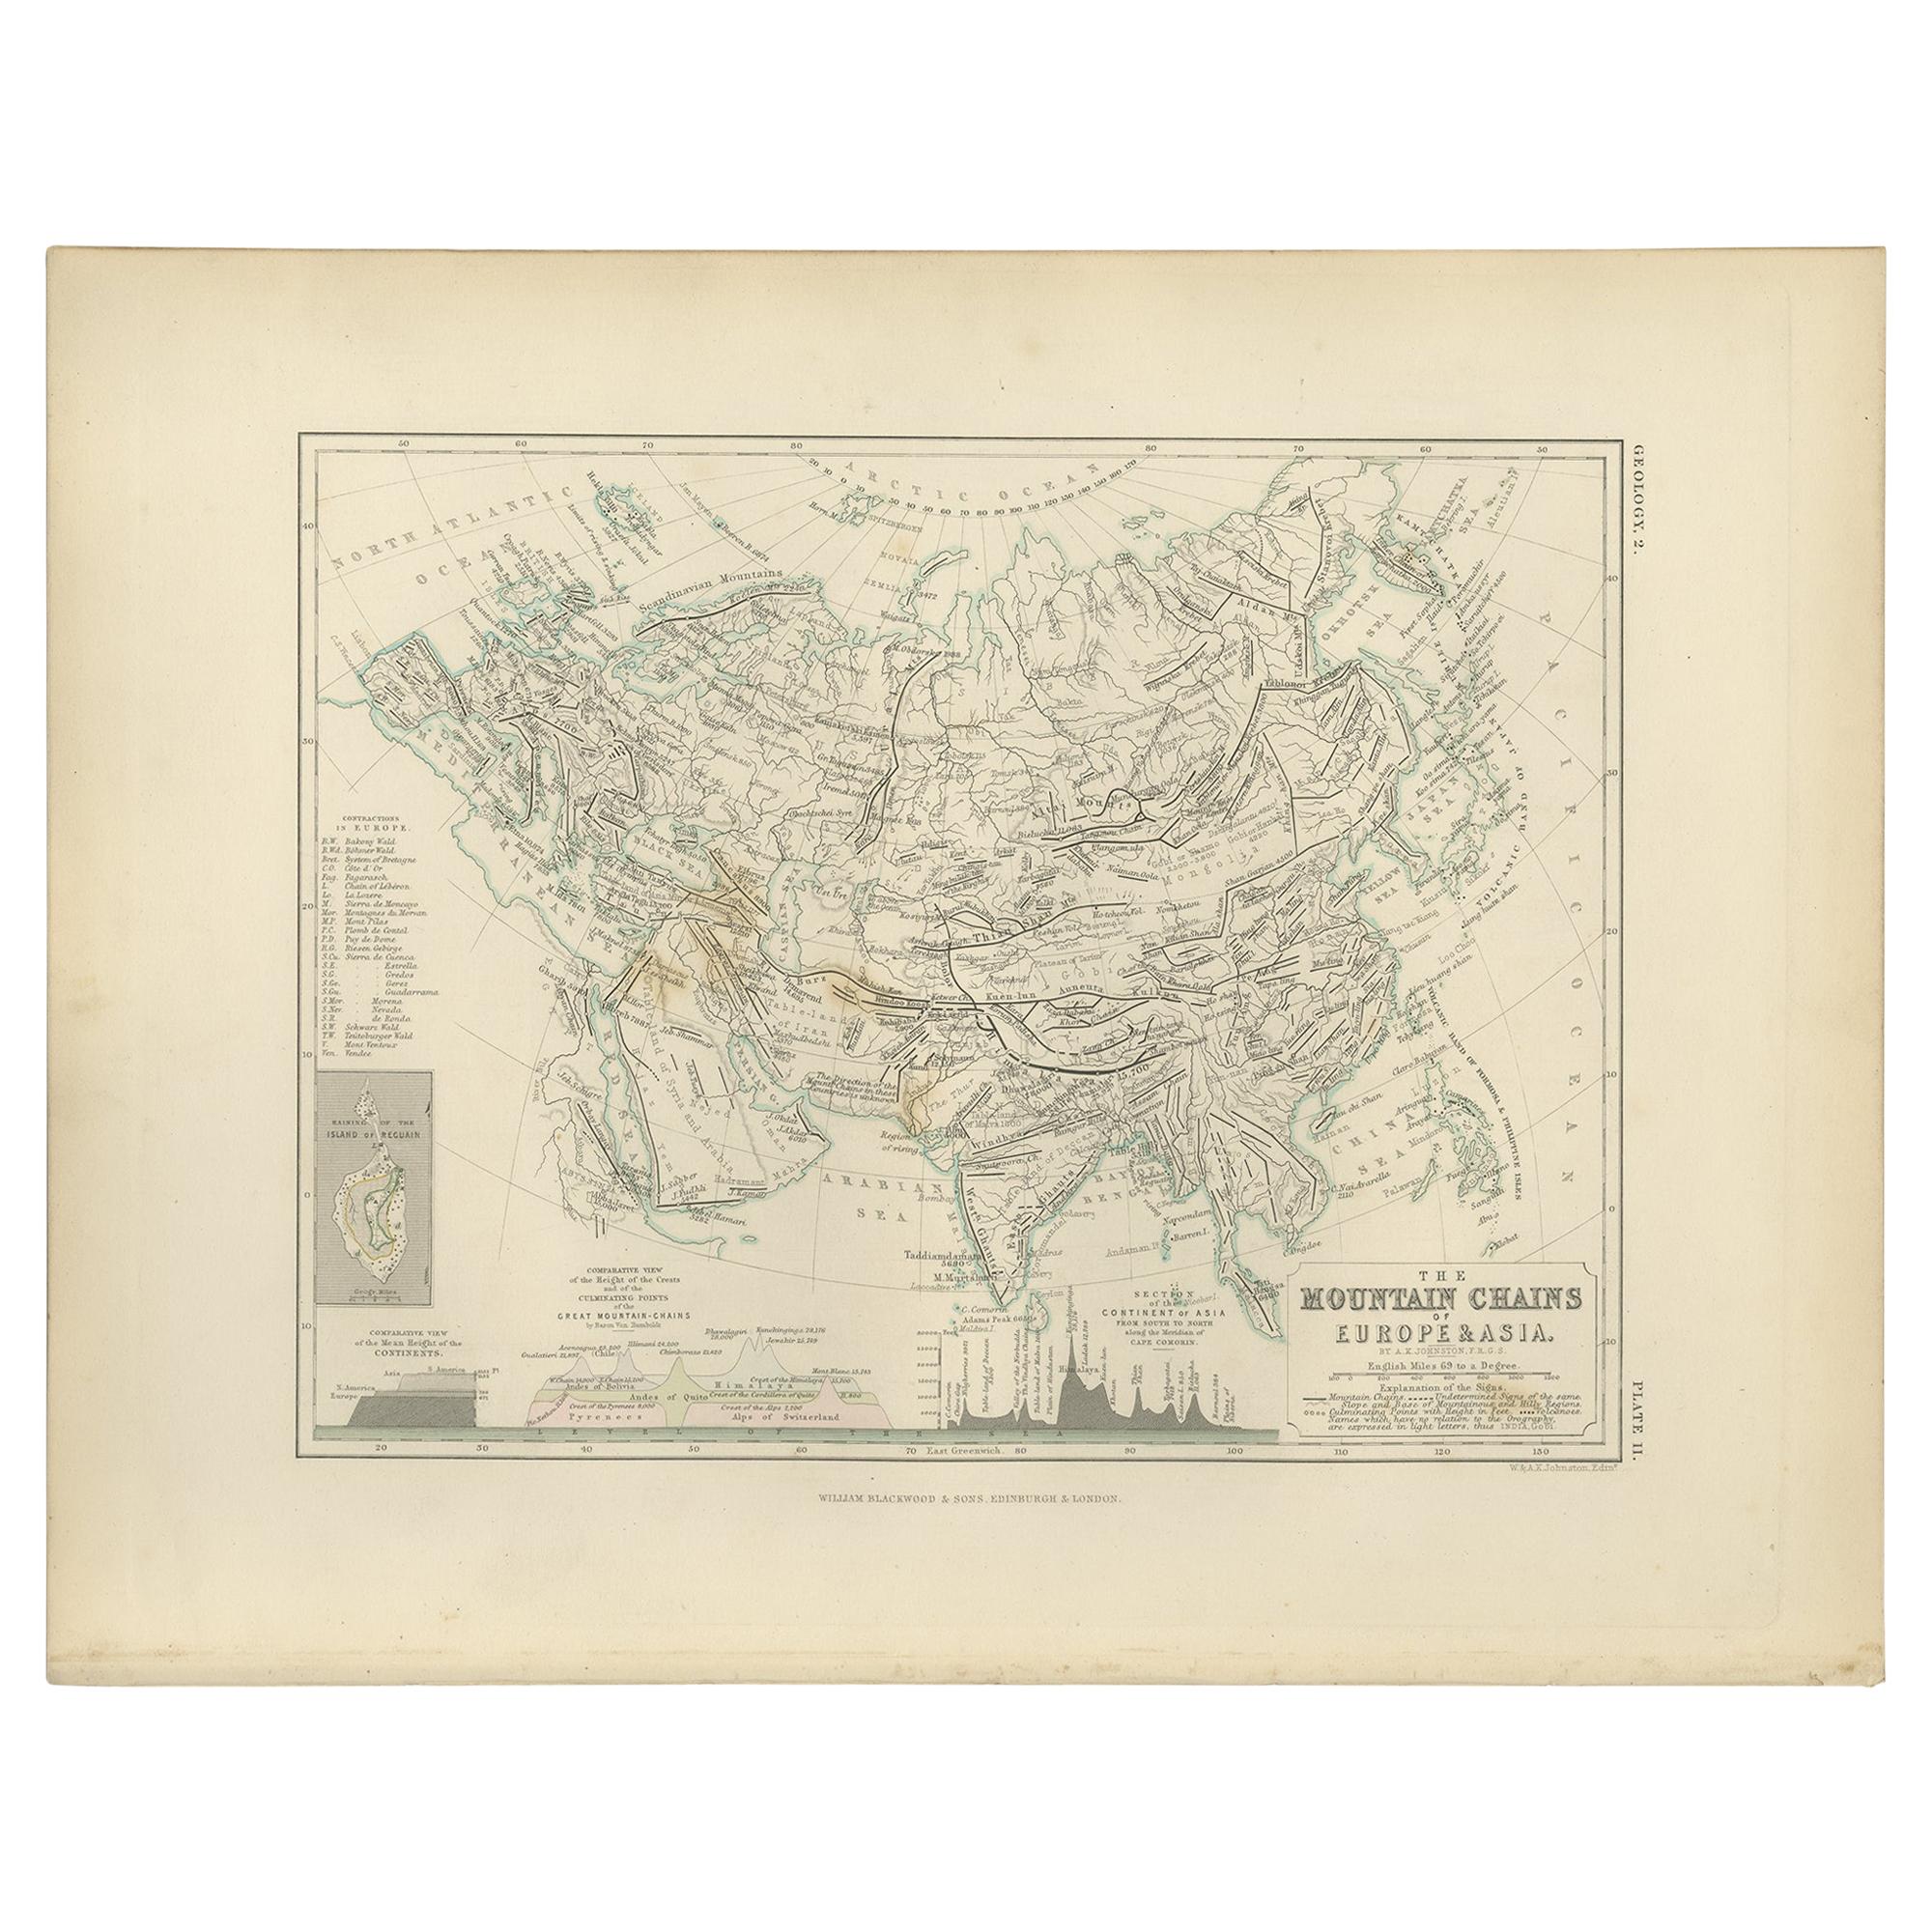 Antique Map of the Mountain Chains of Europe and Asia by Johnston '1850' For Sale